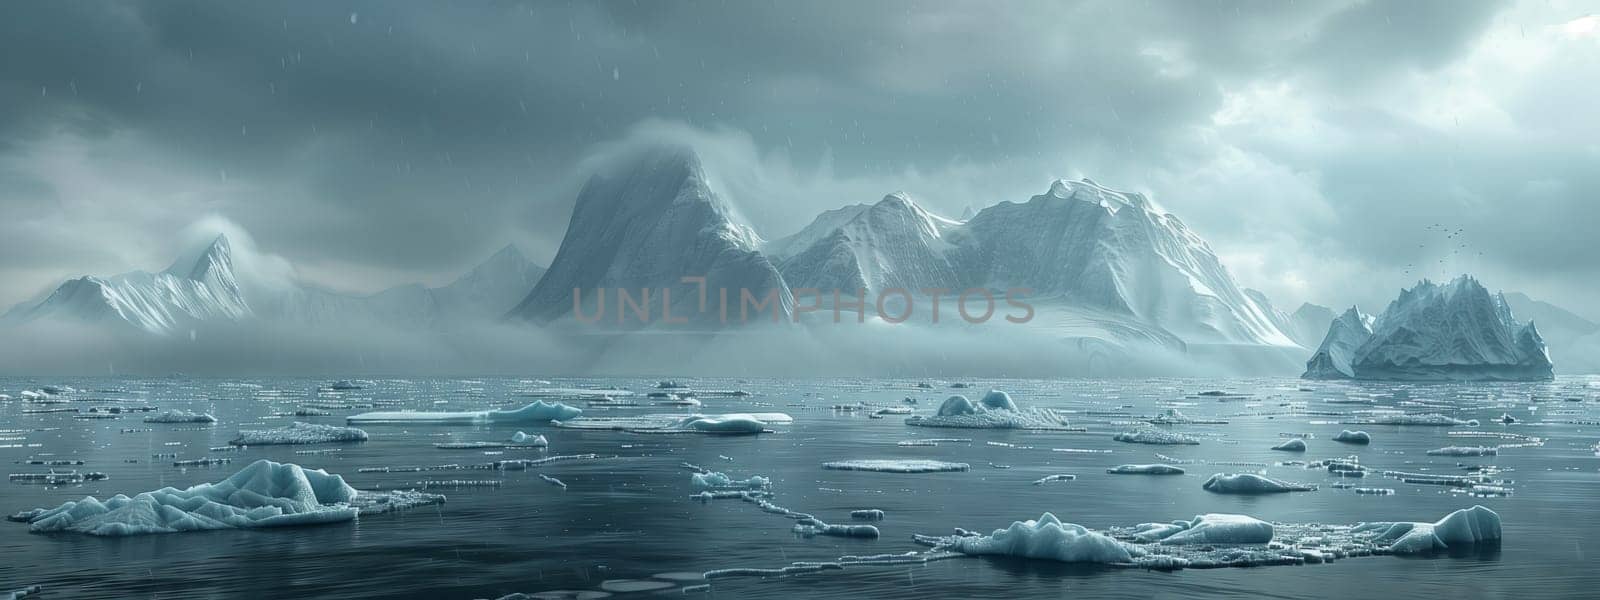 A cluster of icebergs drifts on liquid, under a cloudy sky by richwolf